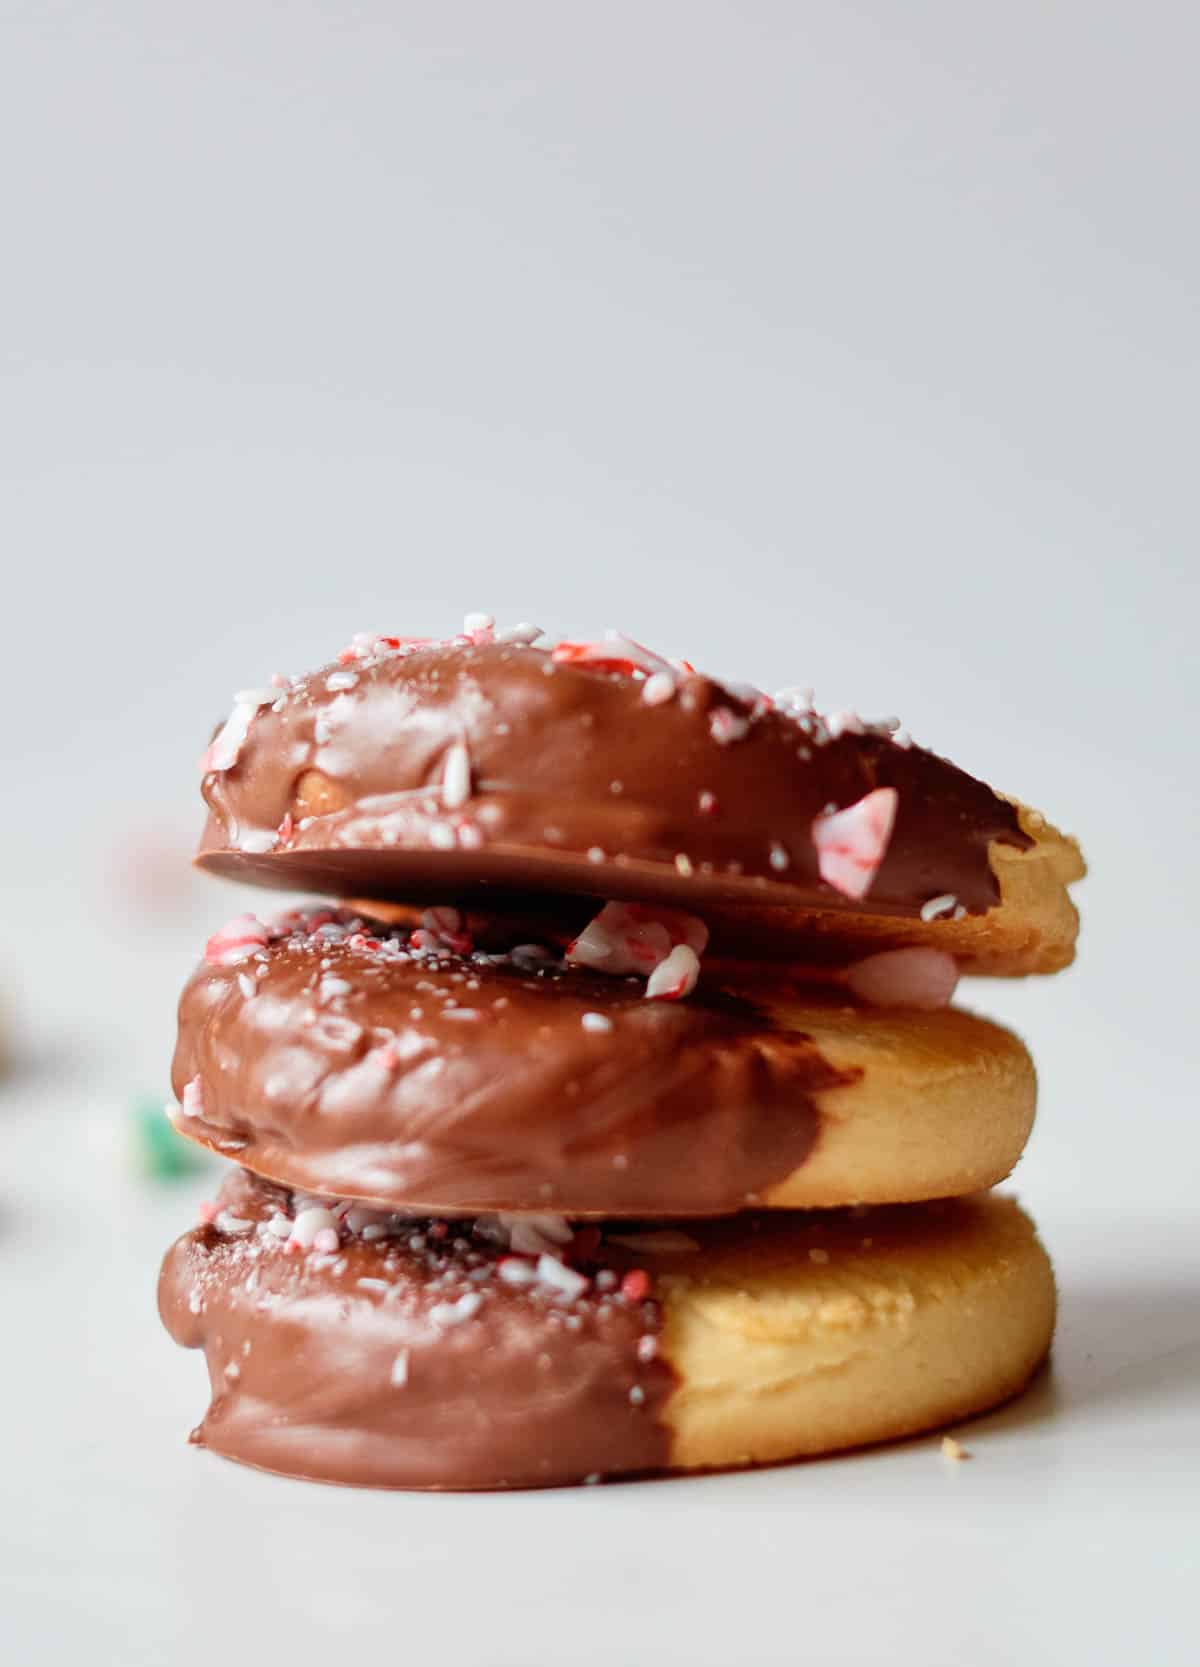 Stack of shortbread cookies dipped in chocolate.